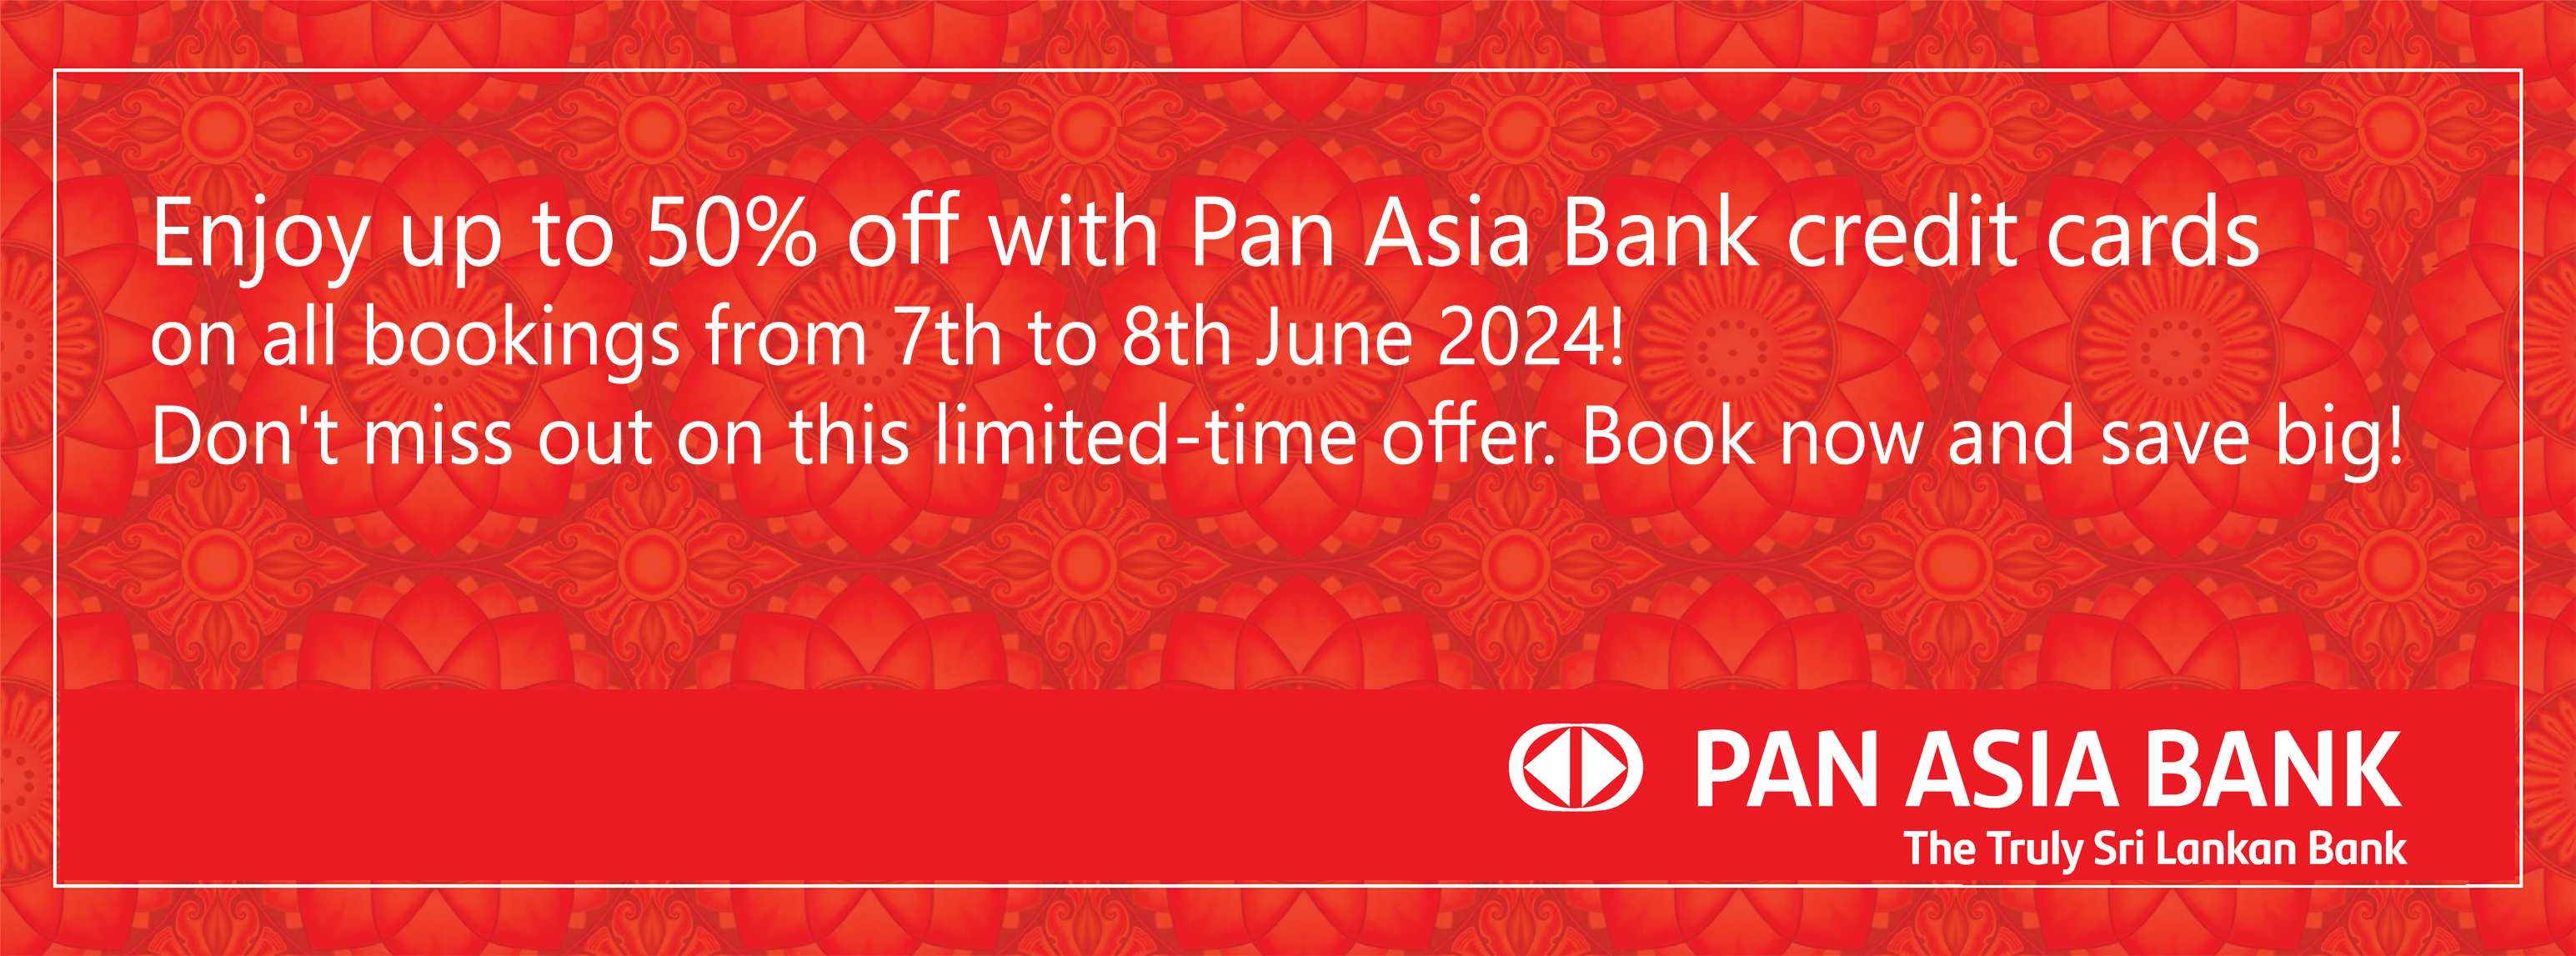 Enjoy up to 50% off with Pan Asia Bank credit cards on all bookings from 7th to 8th June 2024! Don't miss out on this limited-time offer. Book now and save big!